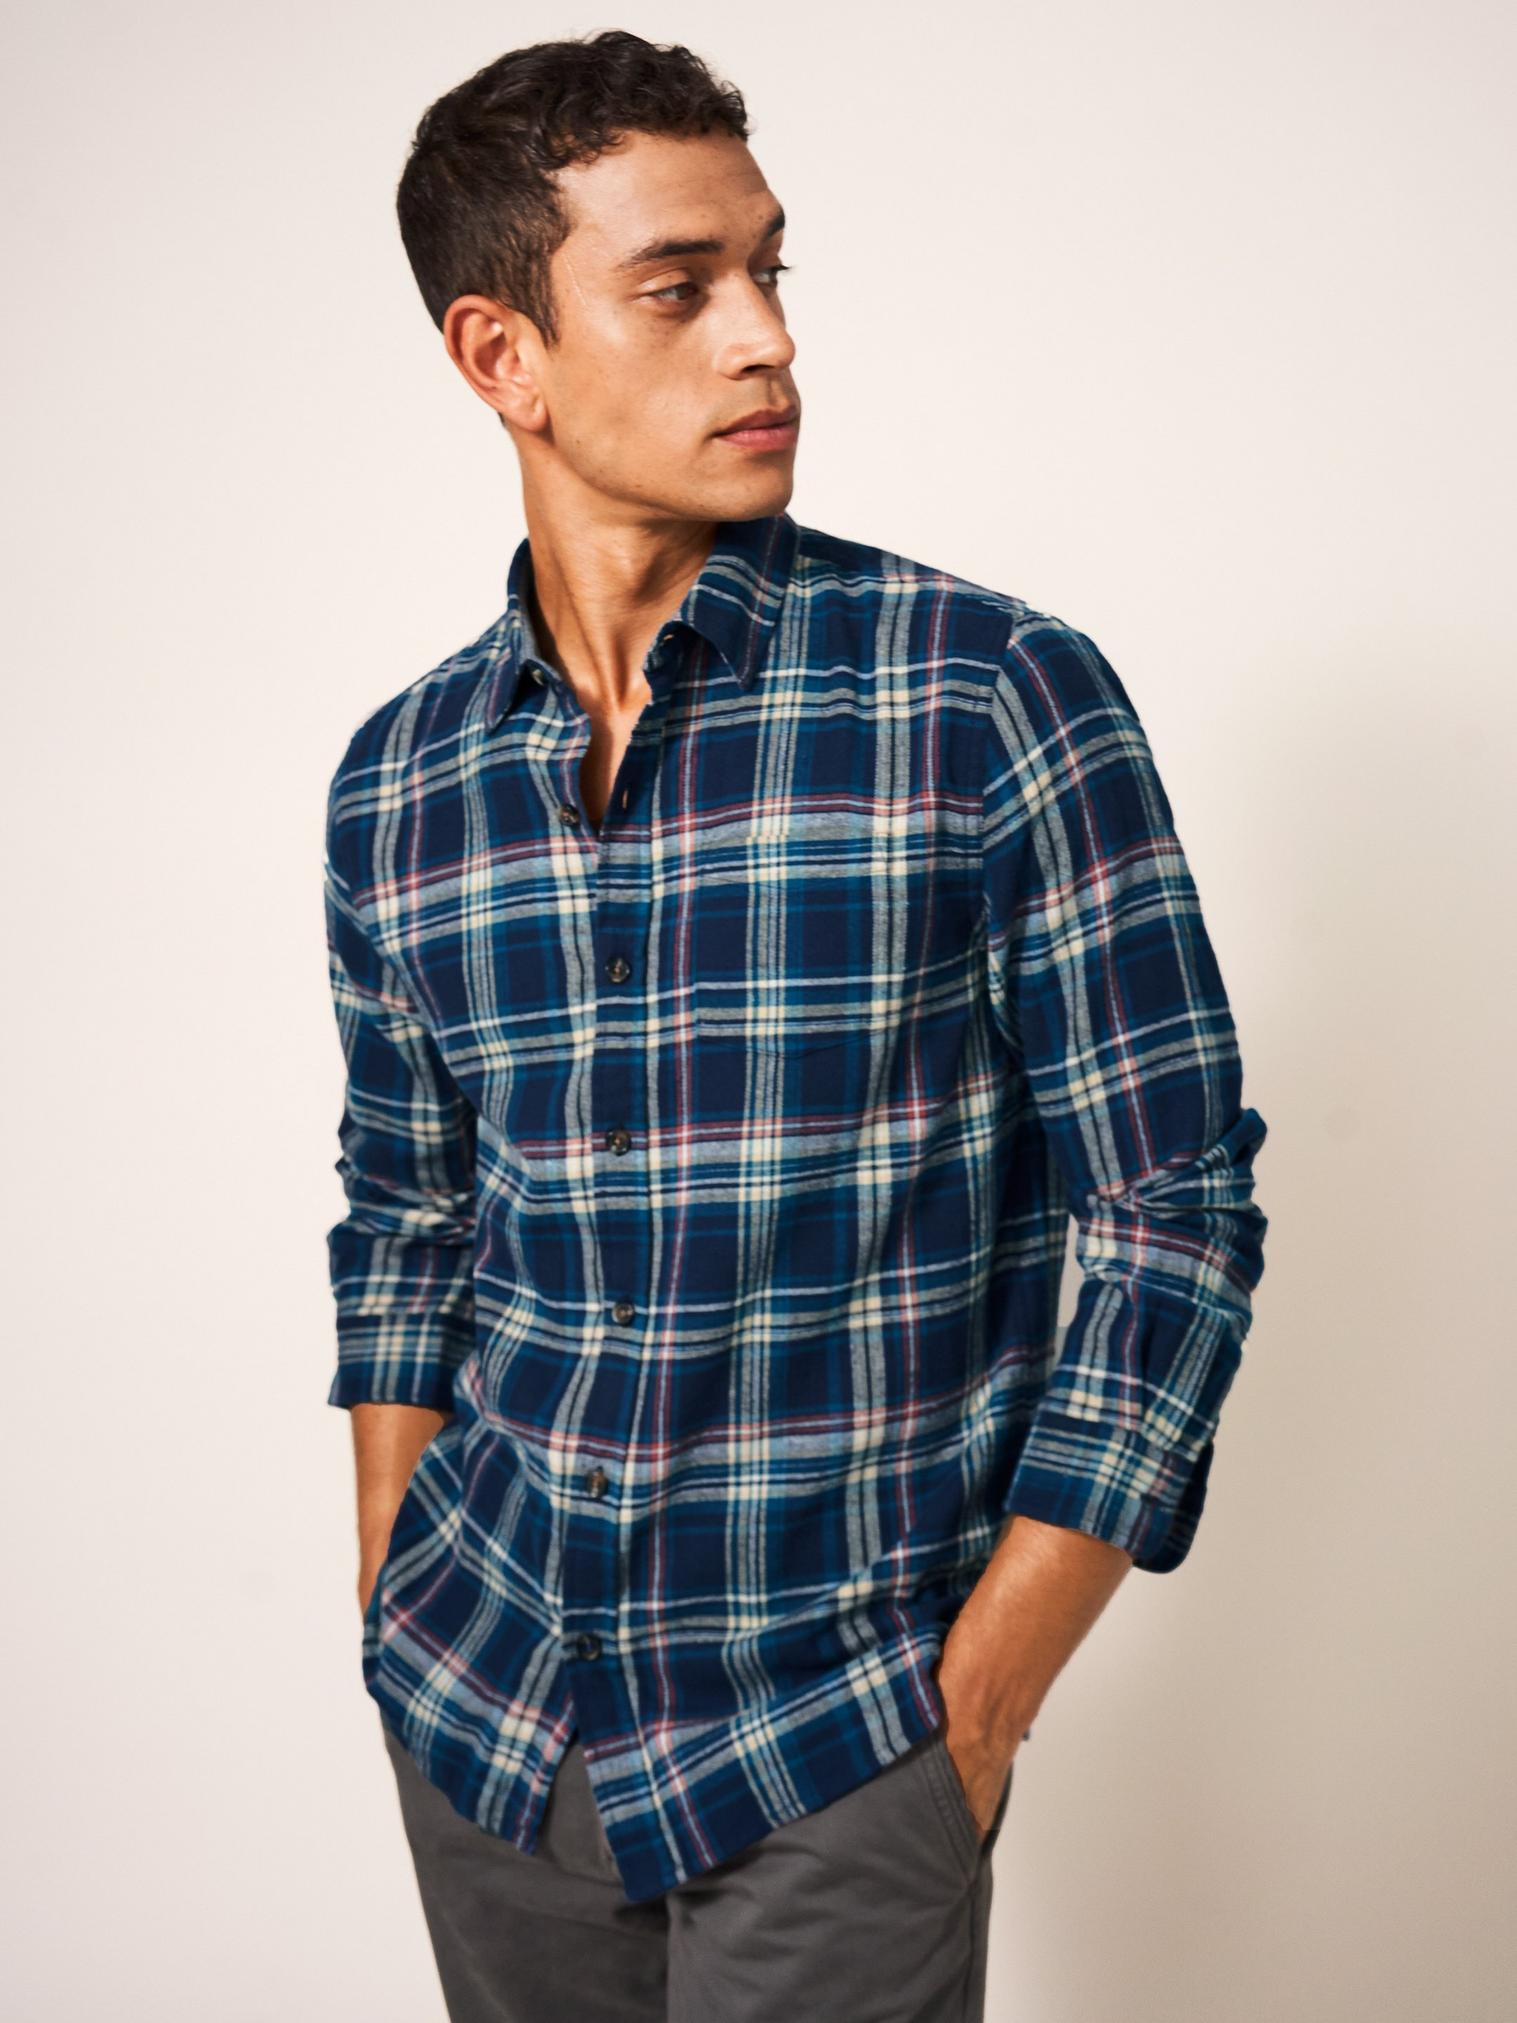 Moxley Flannel Check Shirt in DARK NAVY - LIFESTYLE